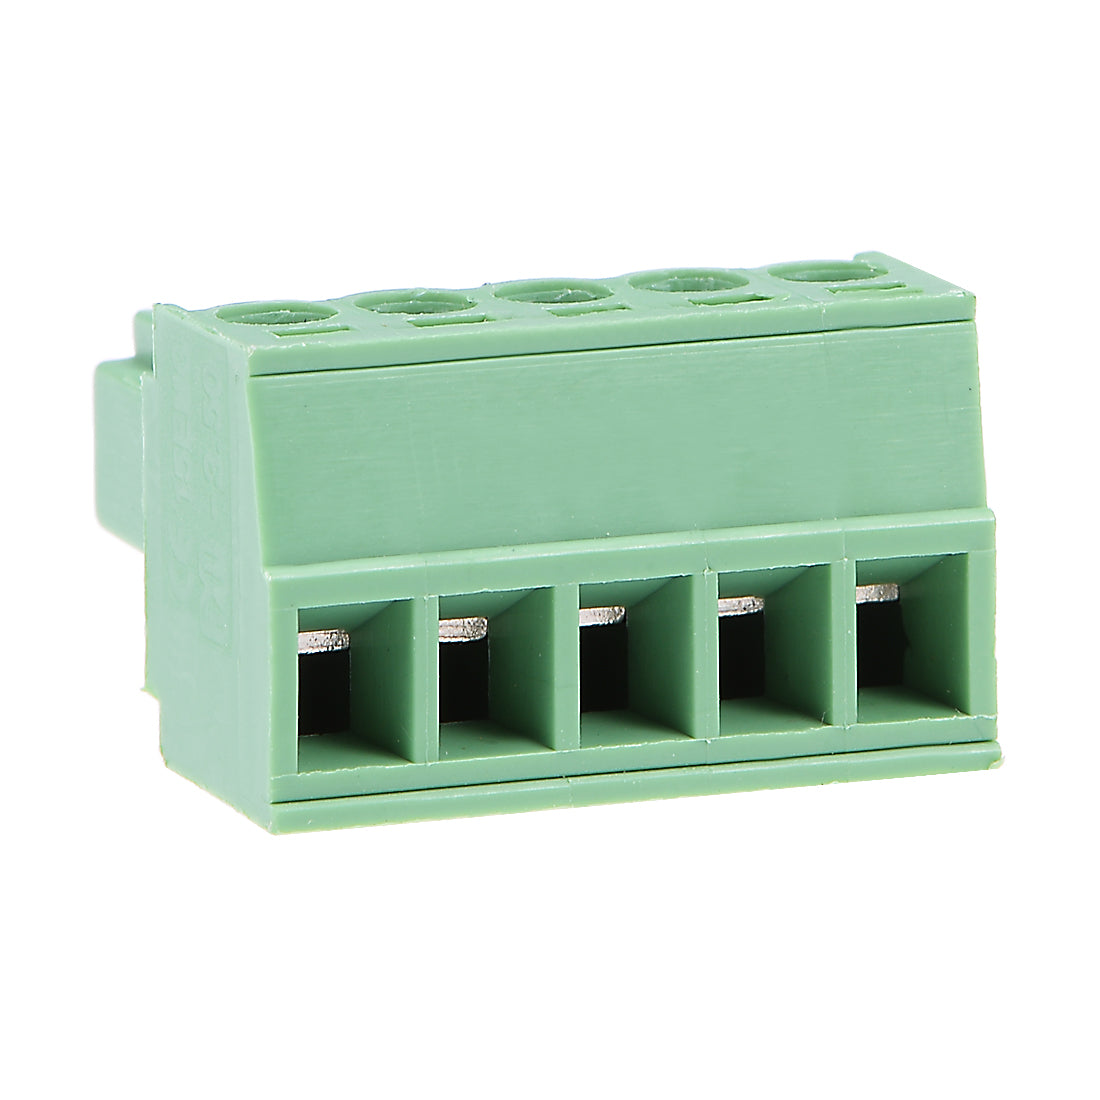 uxcell Uxcell 5Pcs AC300V 8A 3.5mm Pitch 5P Flat Angle Needle Seat Insert-In PCB Terminal Block Connector green